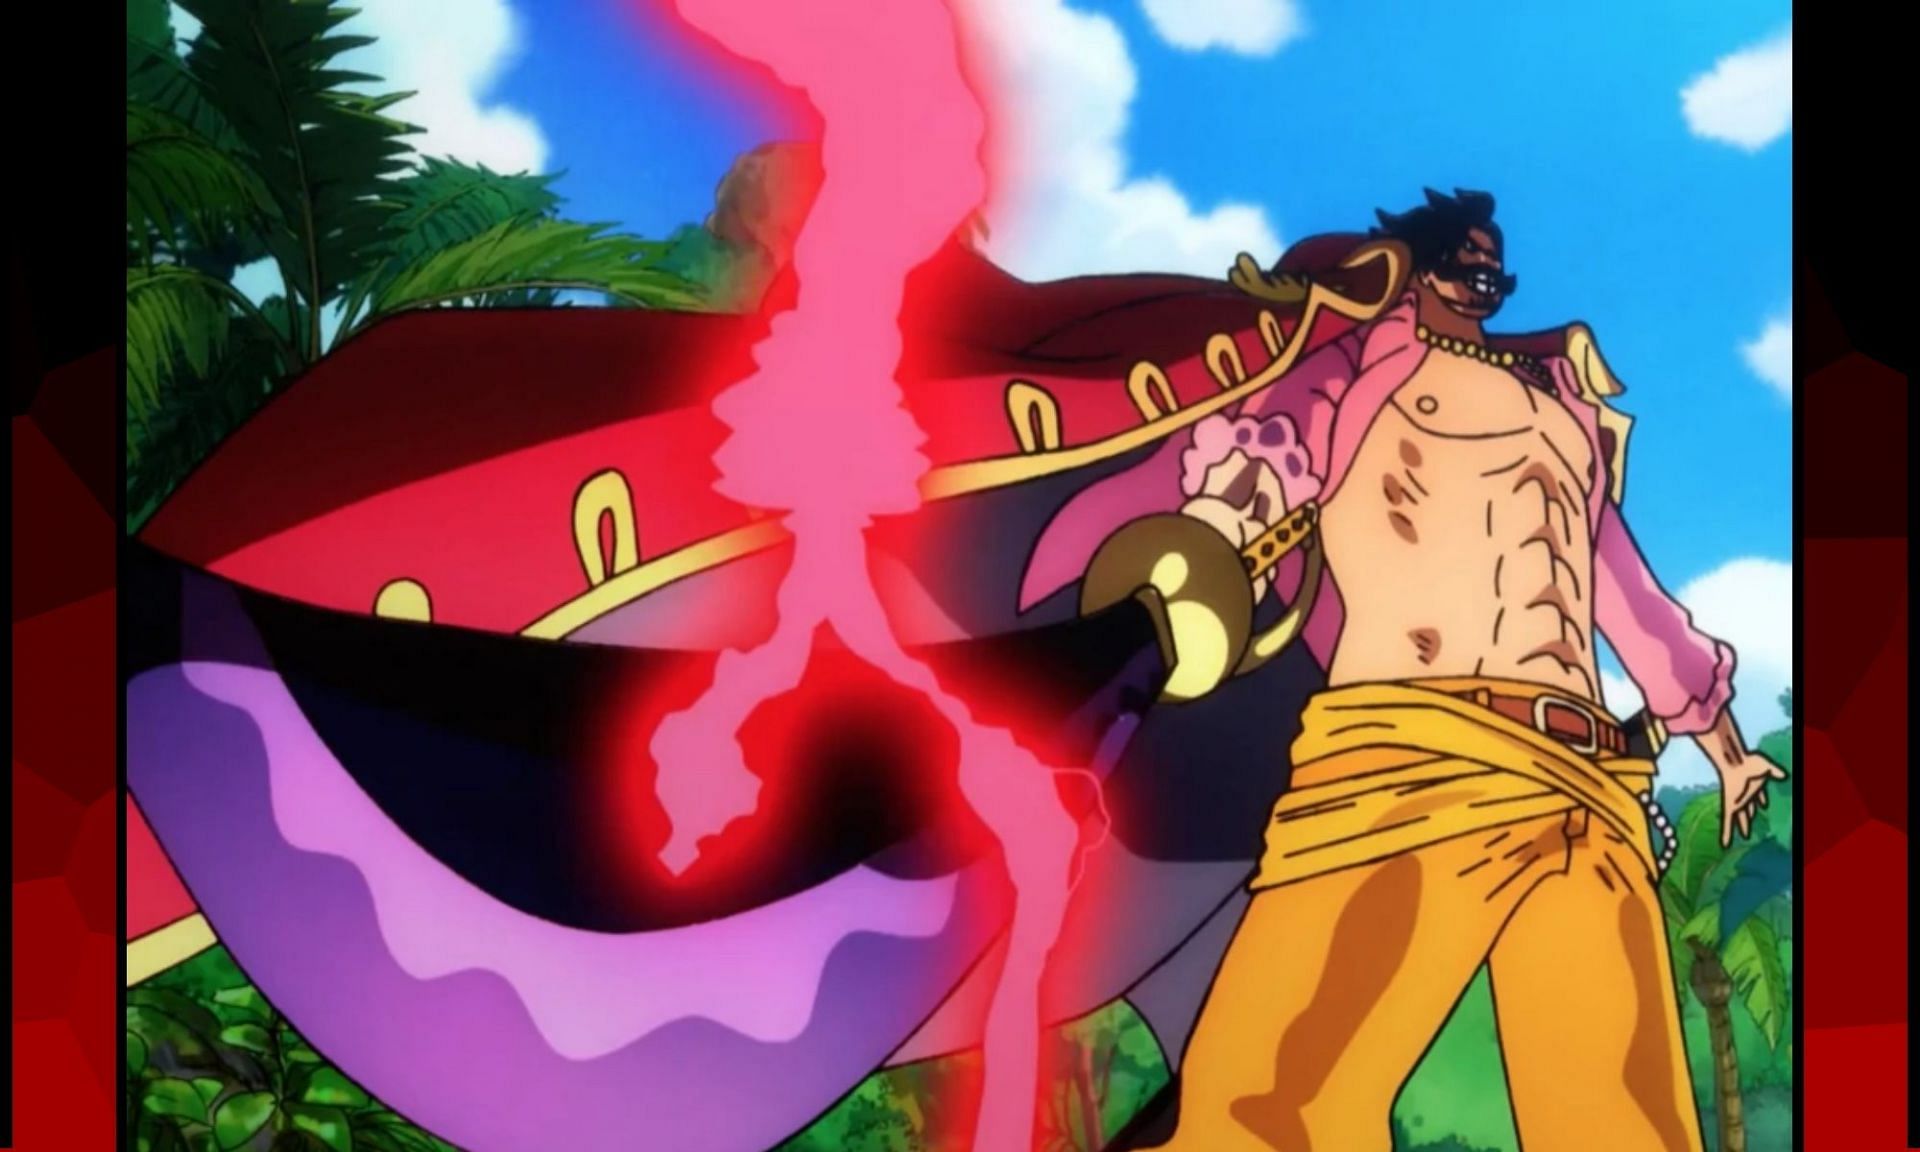 Gol D. Roger is the strongest character in One Piece. Stronger